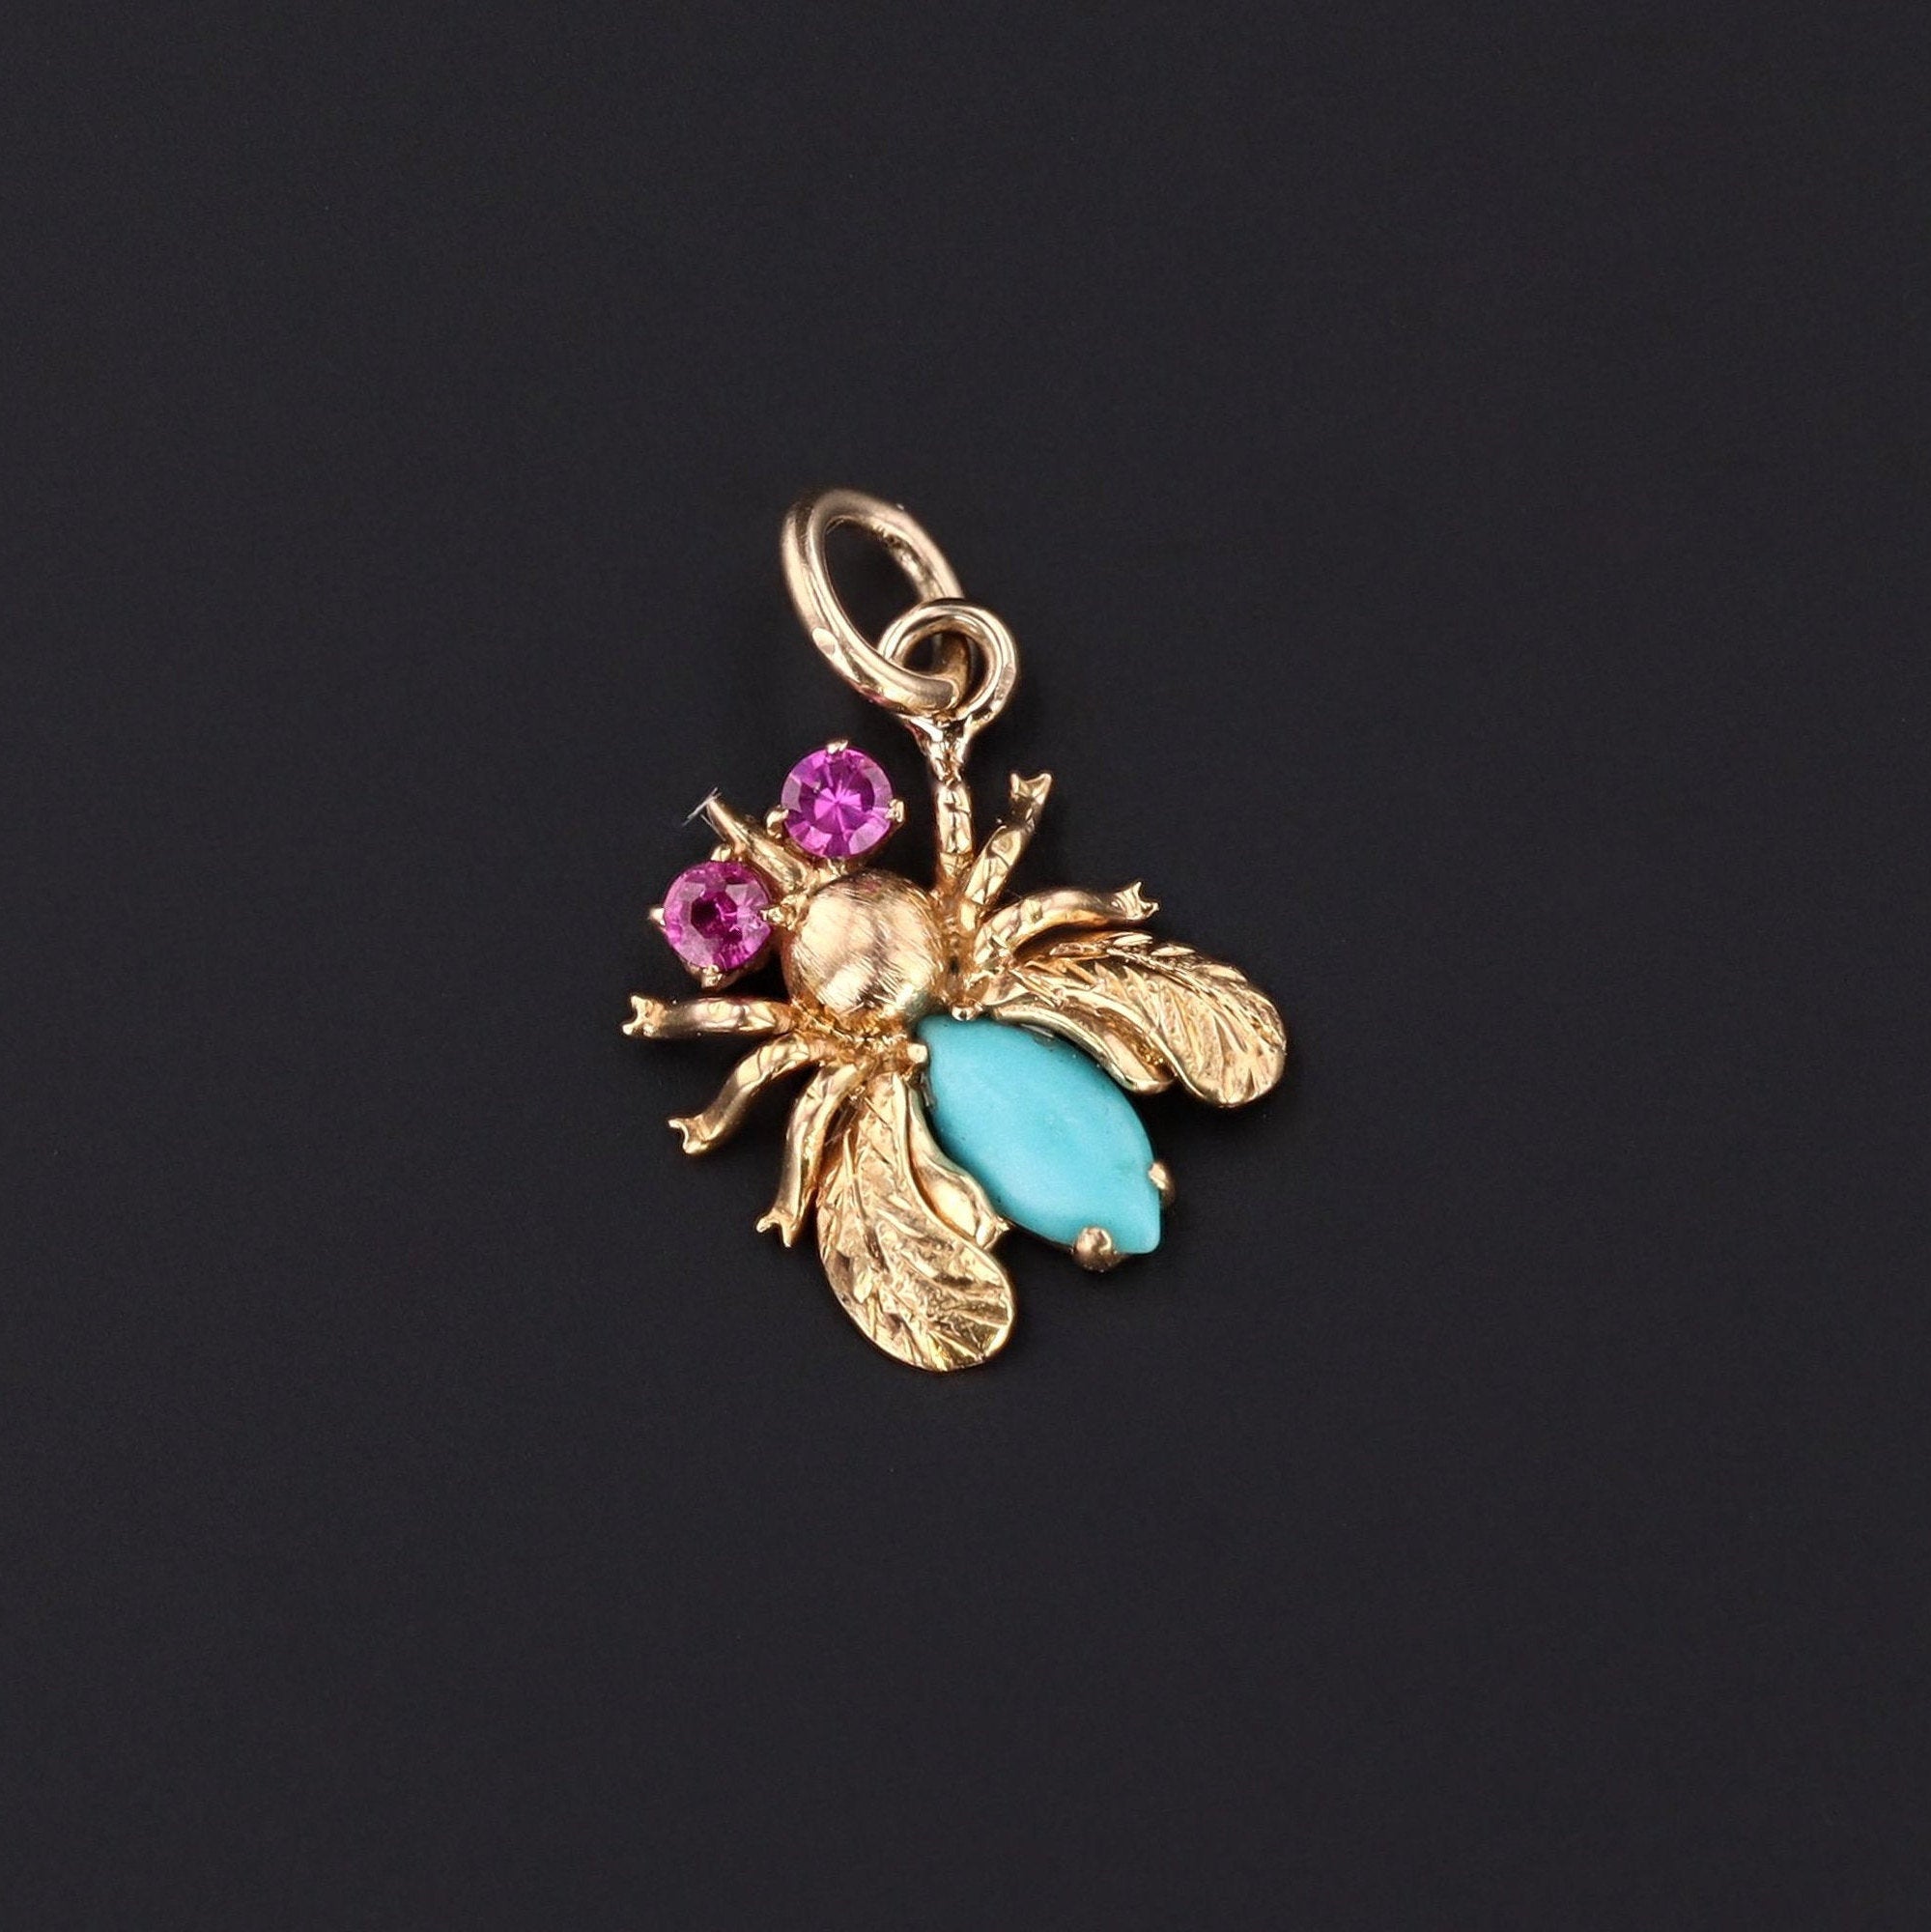 Insect Charm | Vintage Bug or Fly Charm 